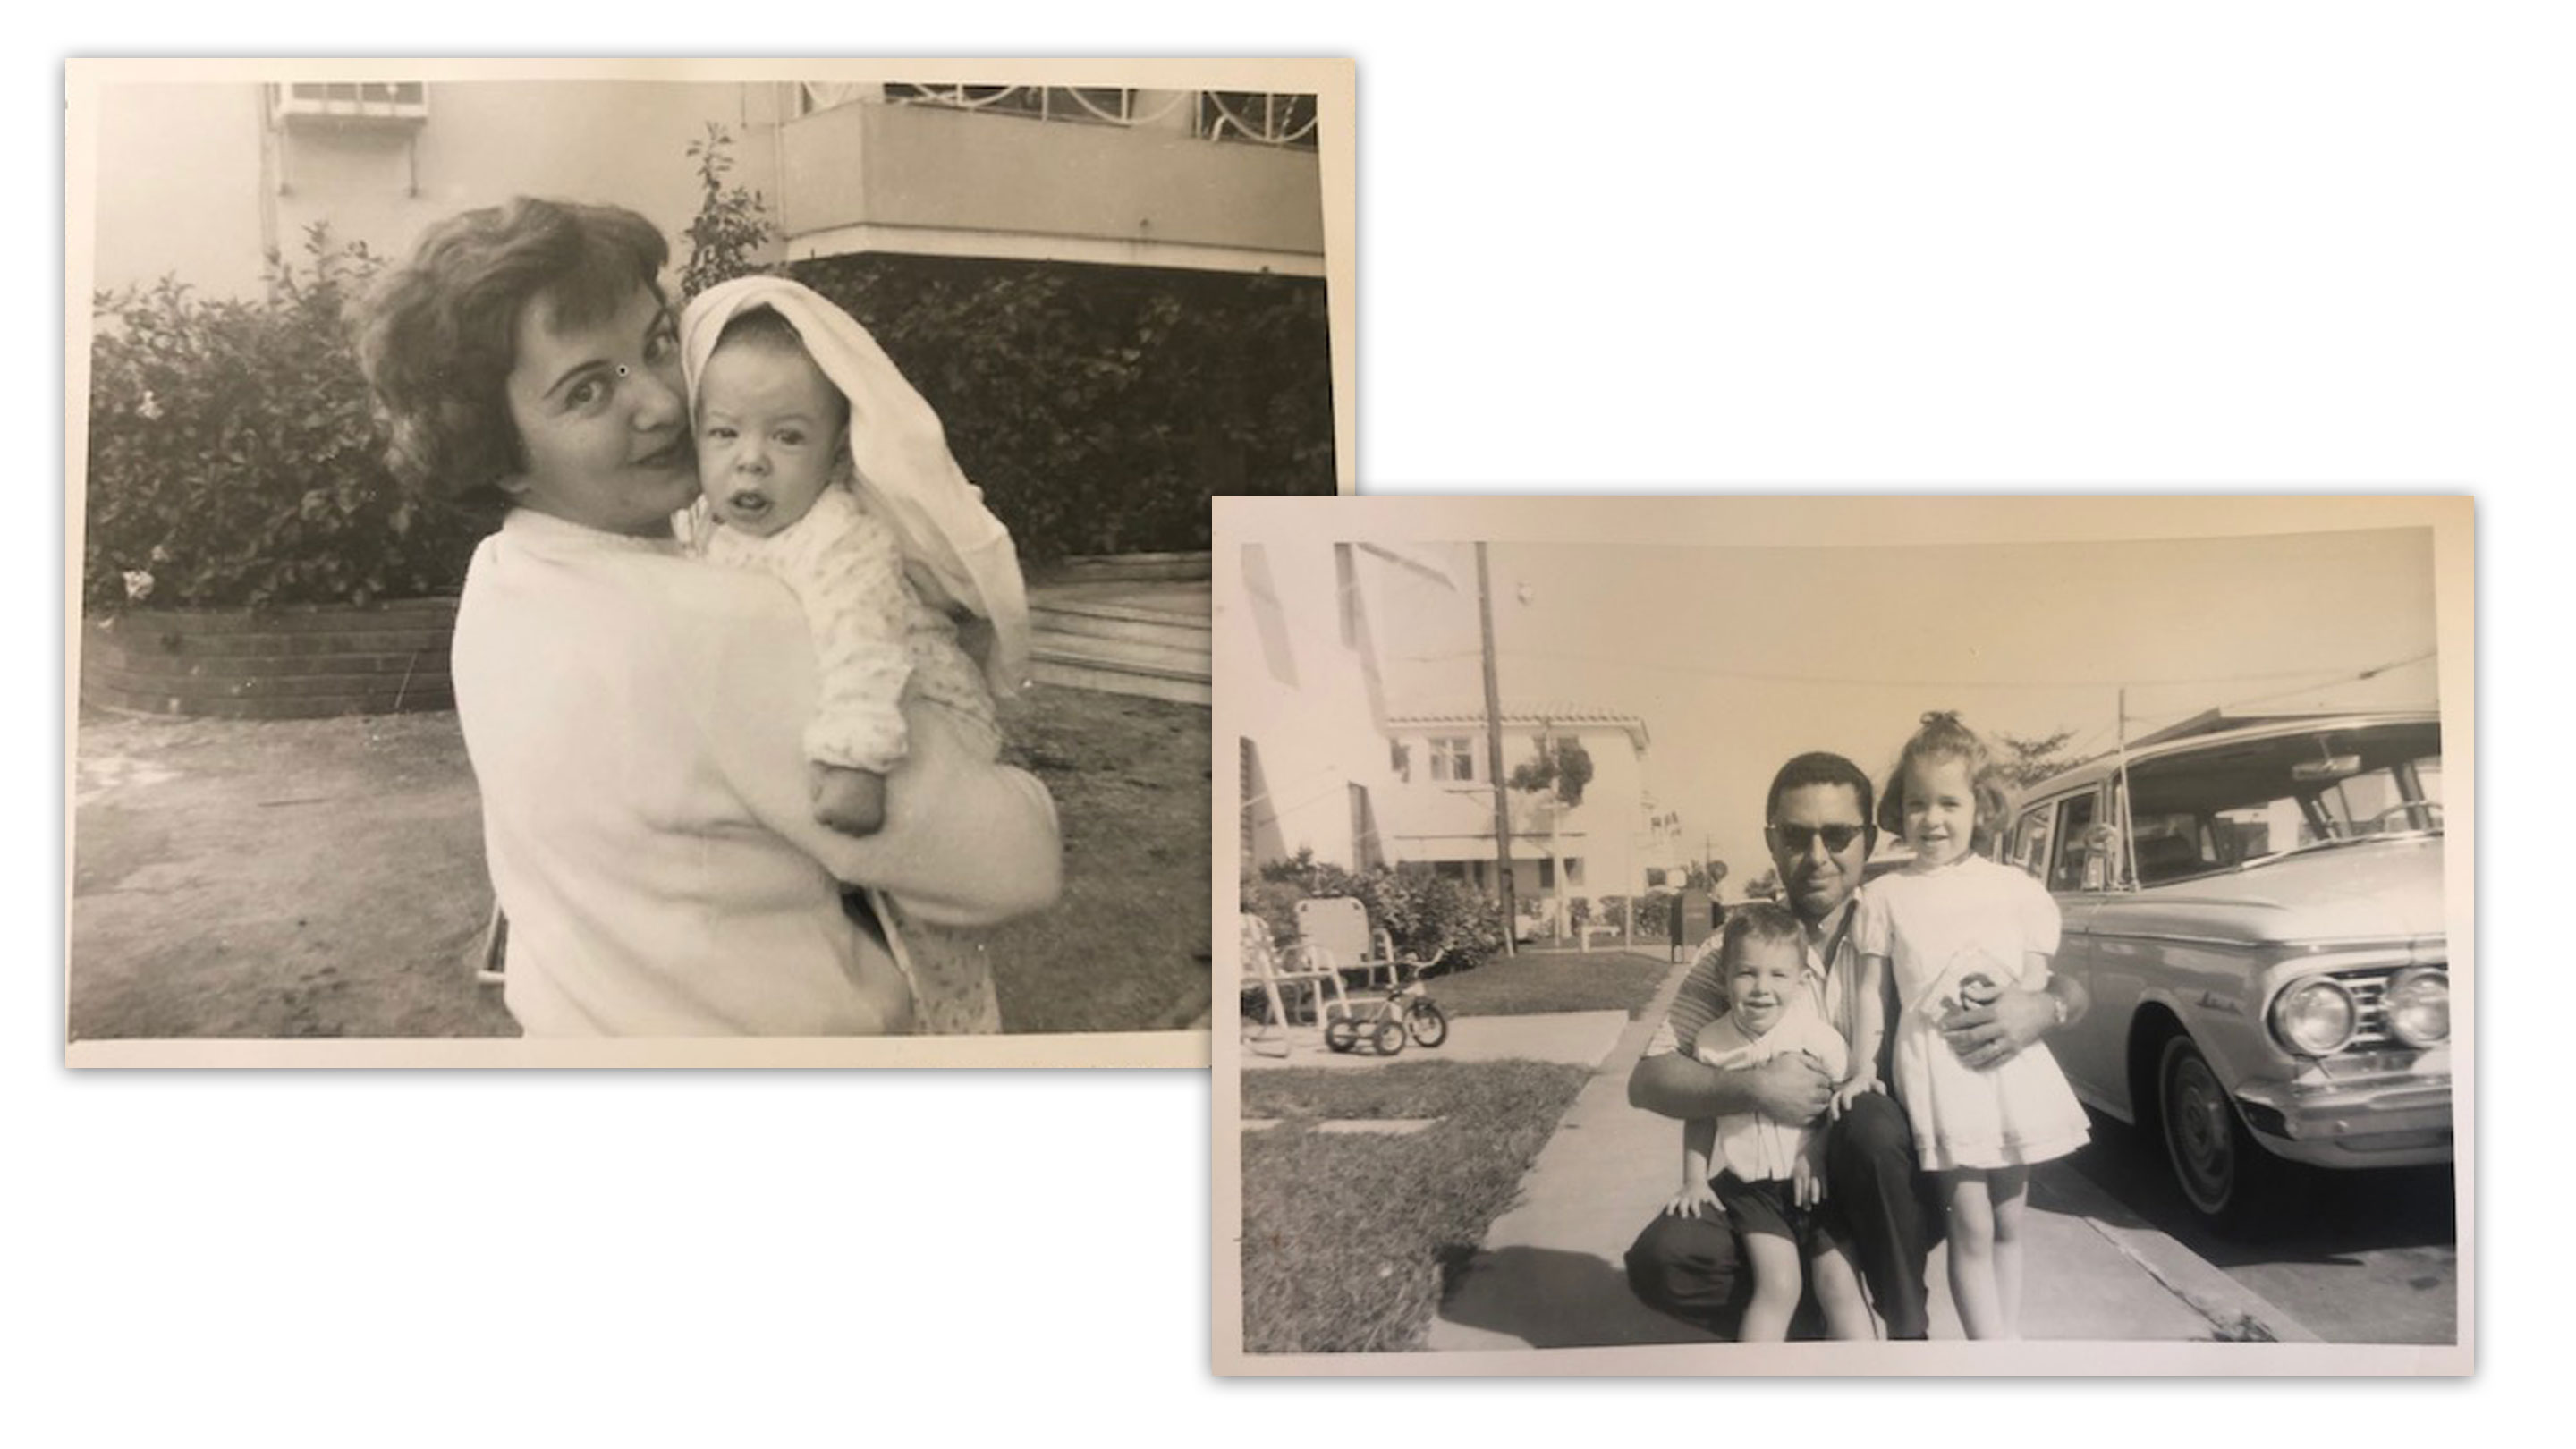 Mayorkas with his mother, Anita, in Havana, Cuba, and later with his father, Charles, and sister, Cathy, in Miami after the family moved to the U.S. (Courtesy photos)